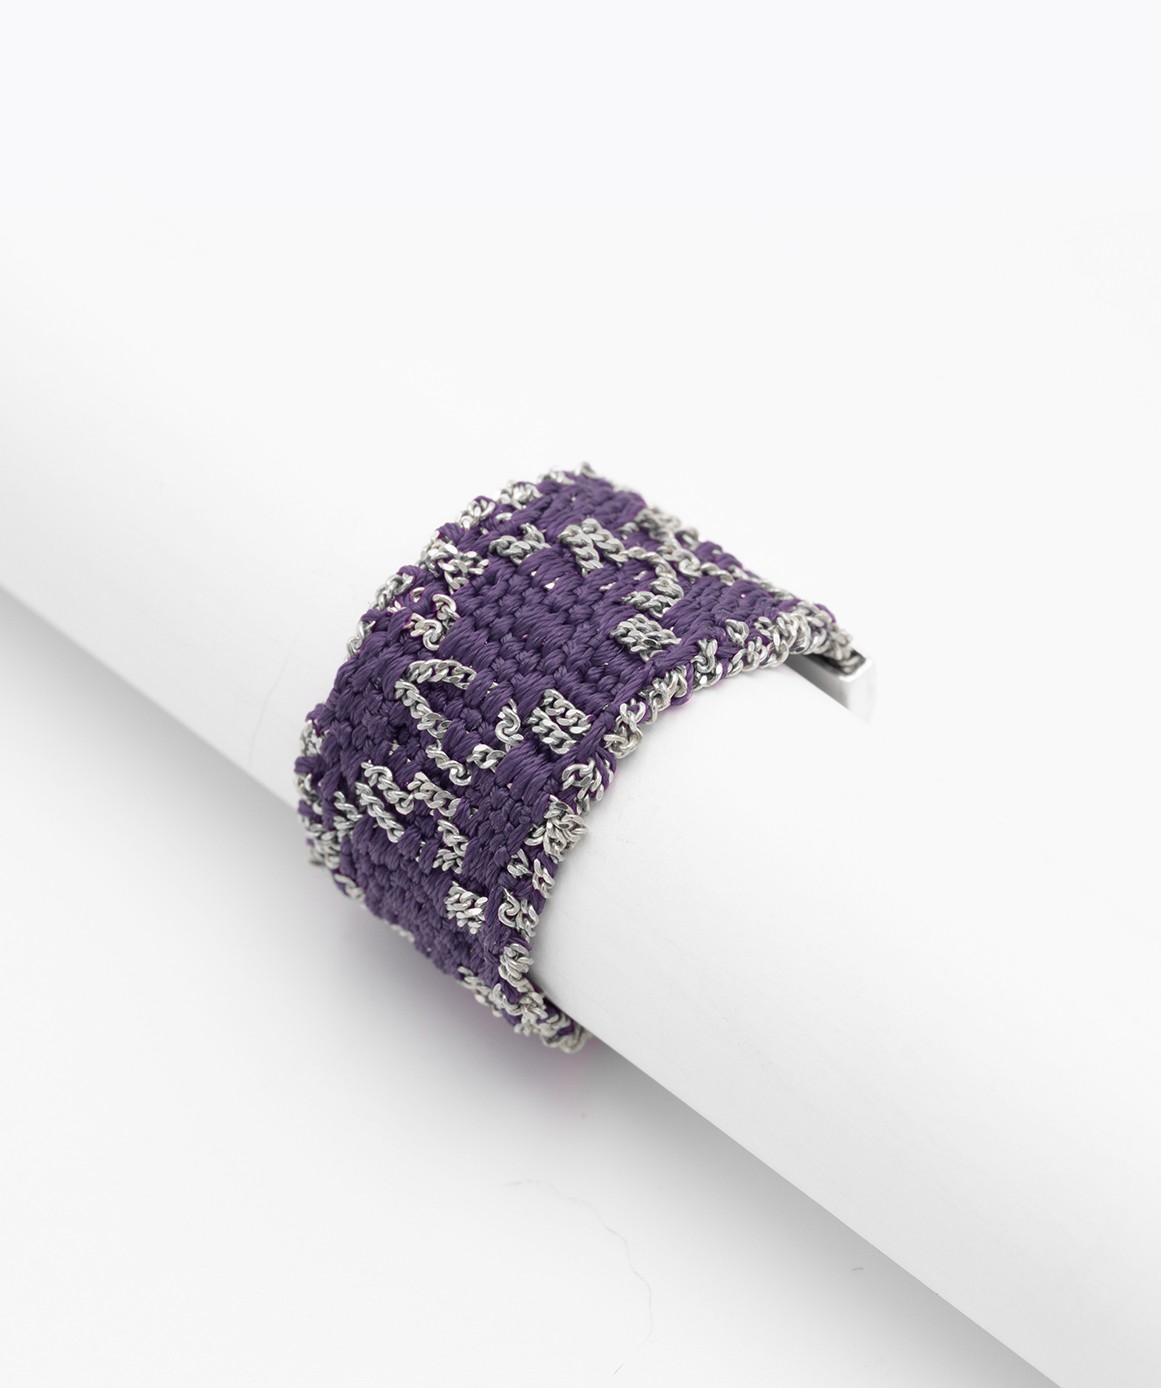 RHOMBUS Ring in Sterling Silver Rhodium plated. Fabric: Purple